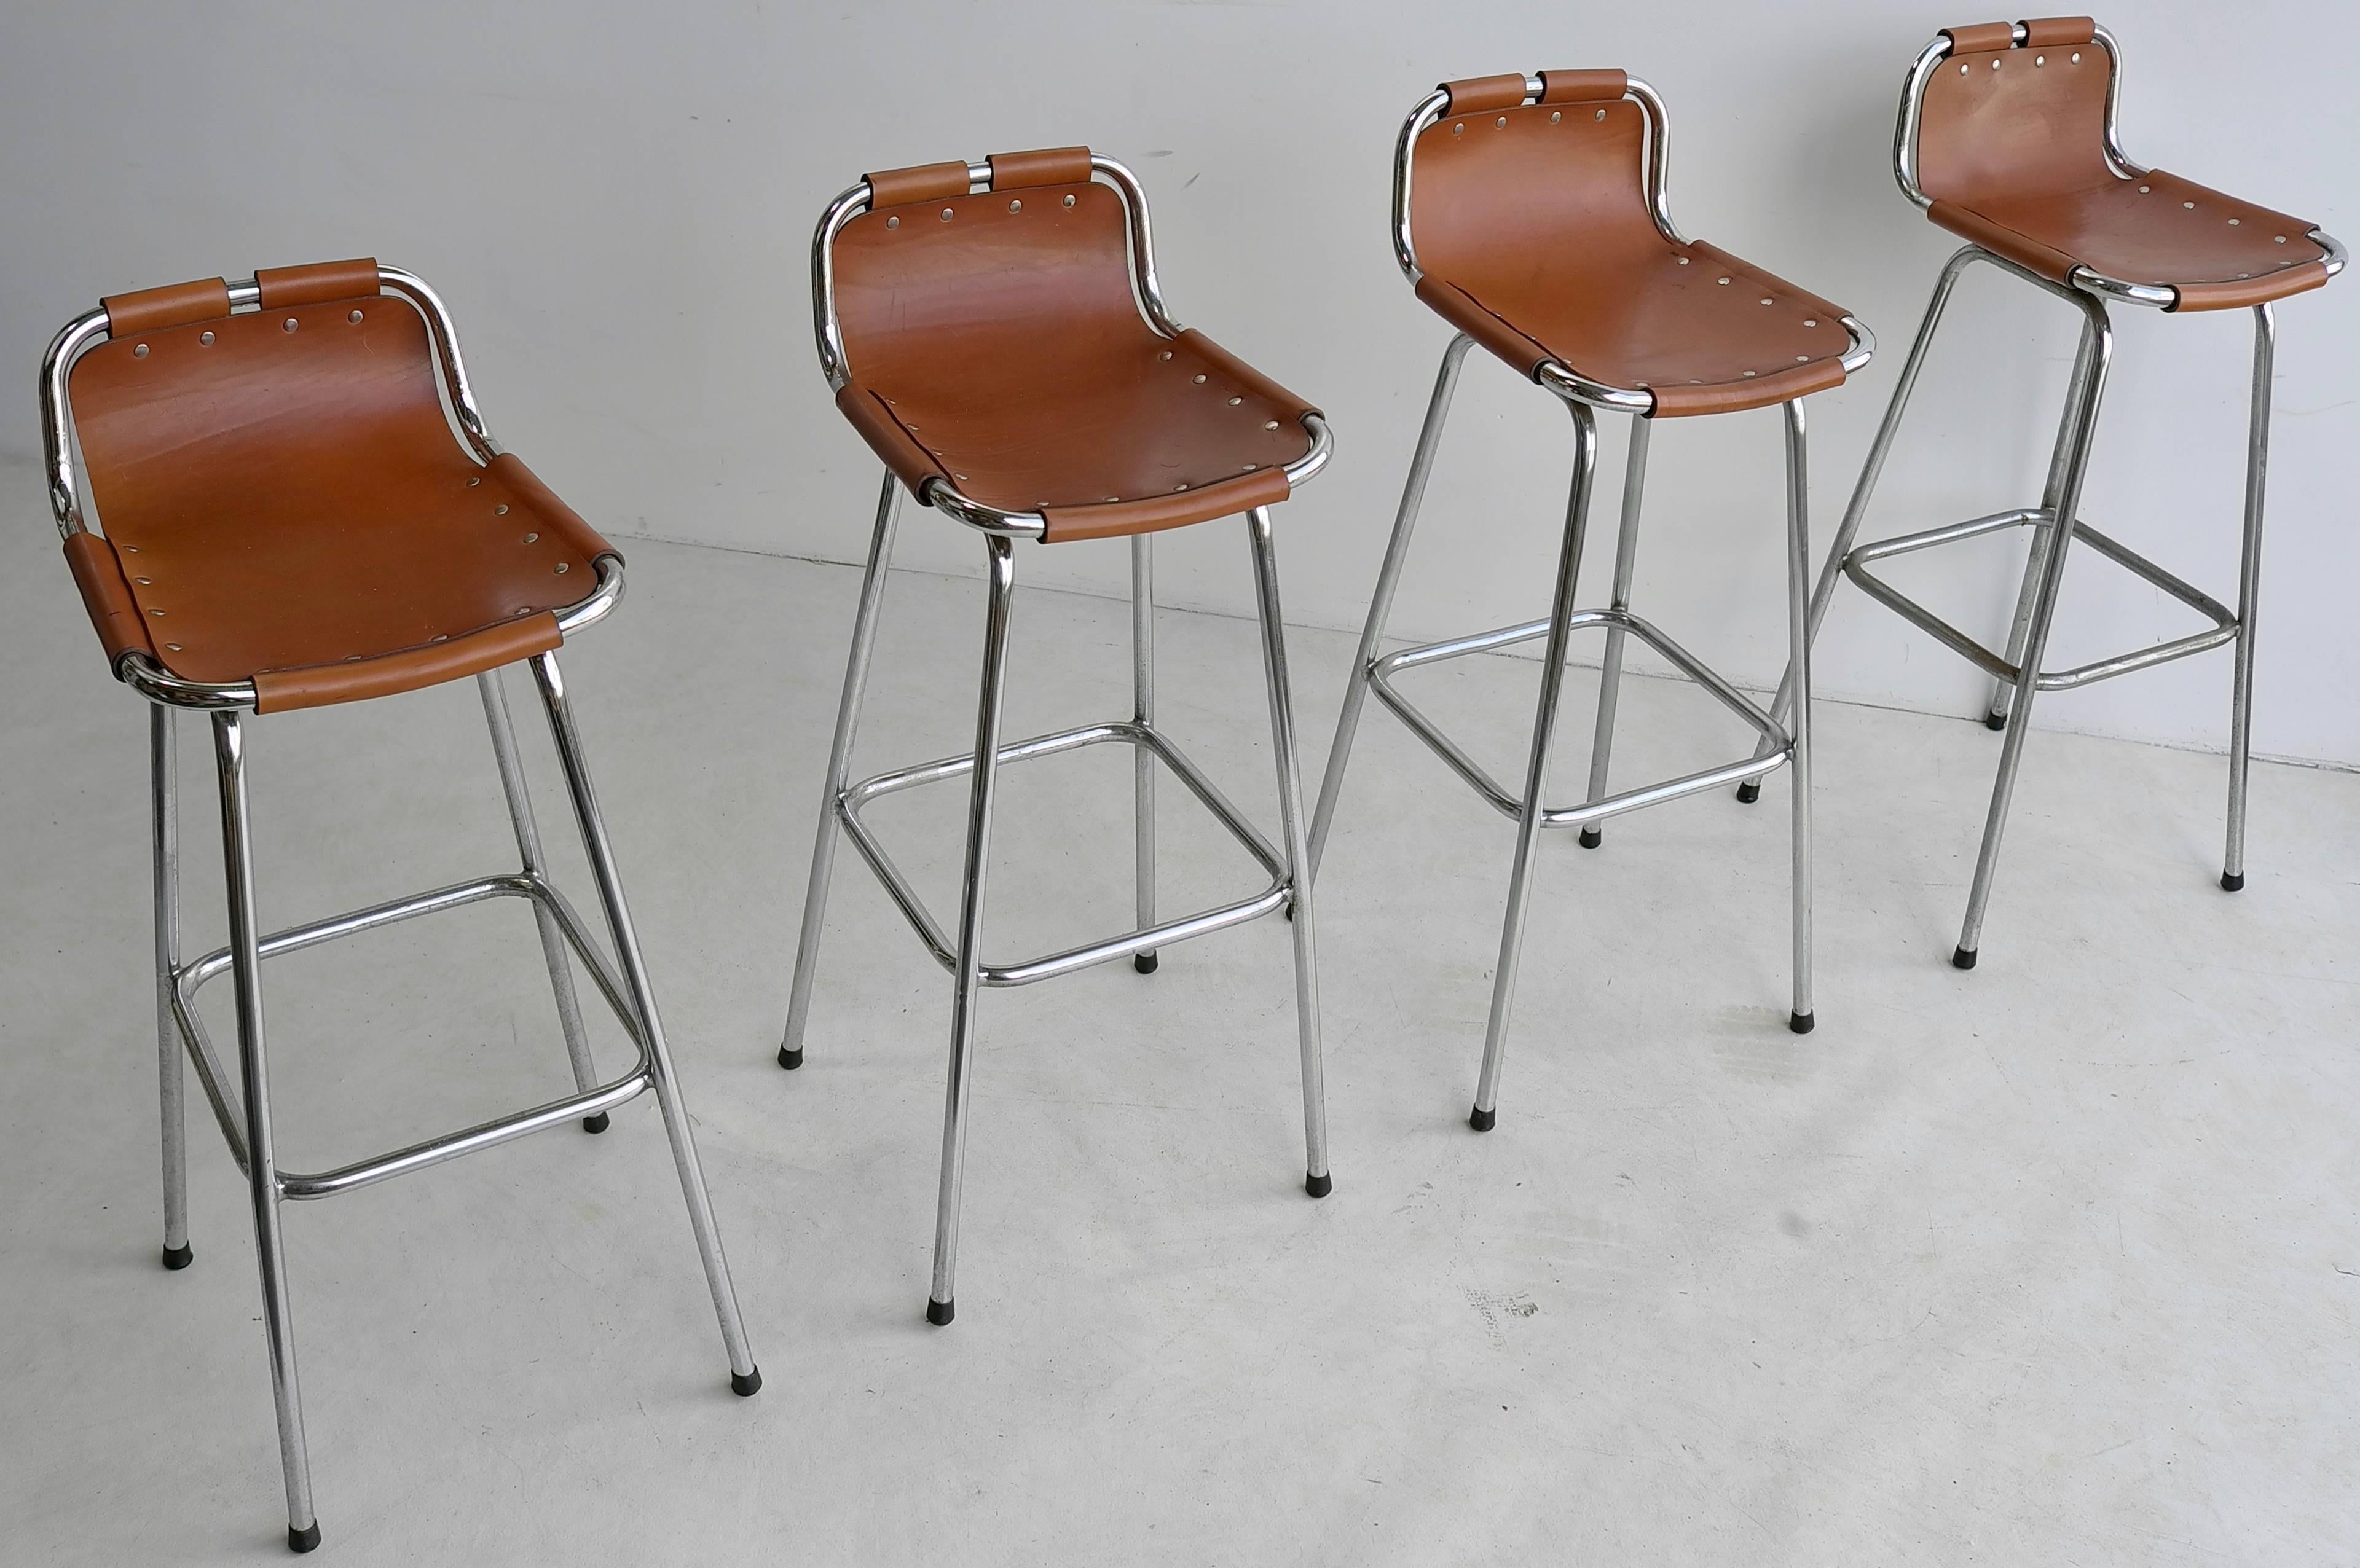 Set of leather barstools for Les Arc Ski Resort, France, 1960s.

Charlotte Perriand was a French architect and designer. Her work aimed to create functional living spaces in the belief that better design helps in creating a better society.  These